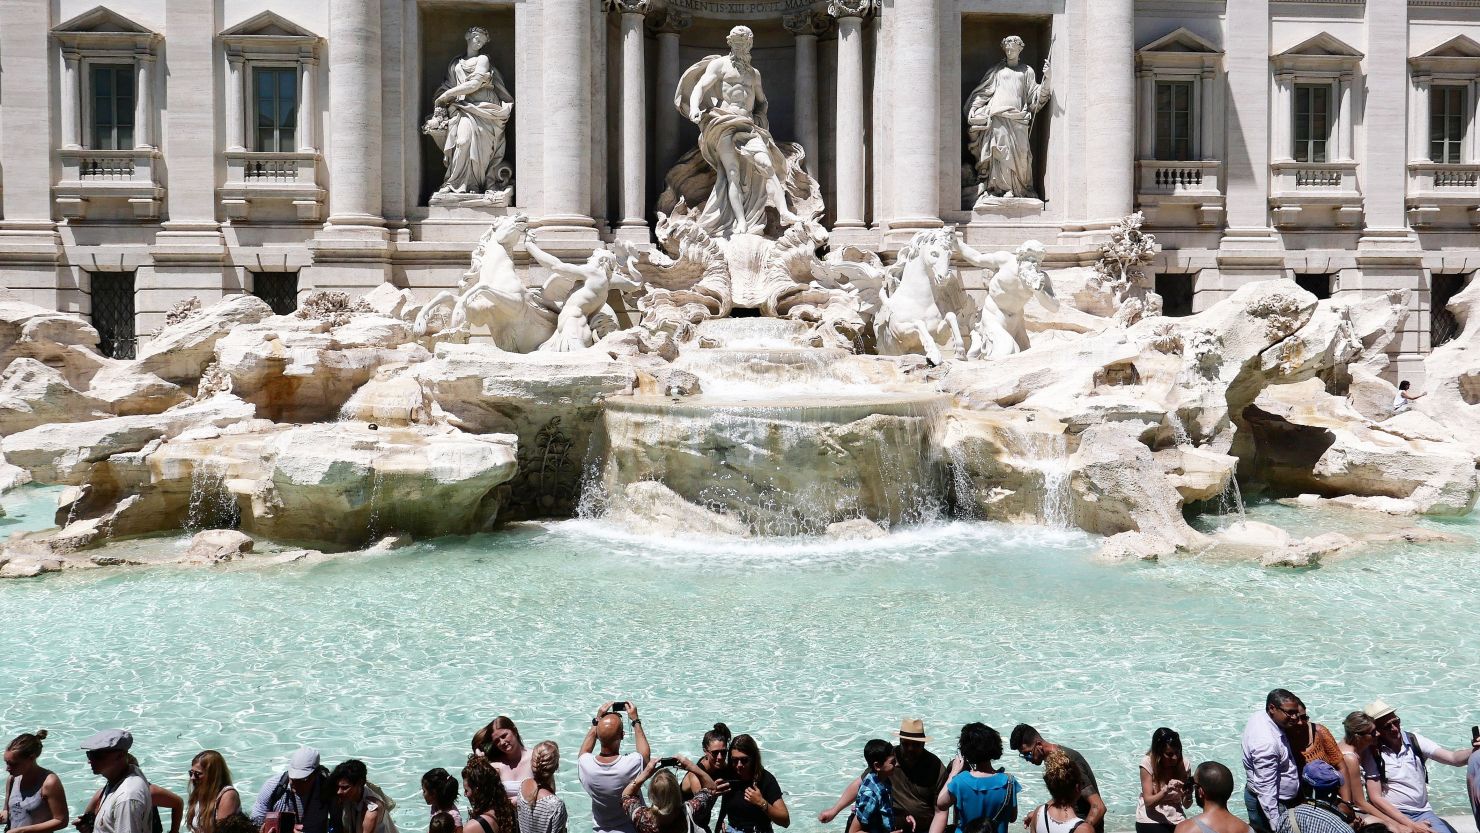 Trevi Fountain has become a source of contention in Italy as tourists routinely disrespect the famous monument.